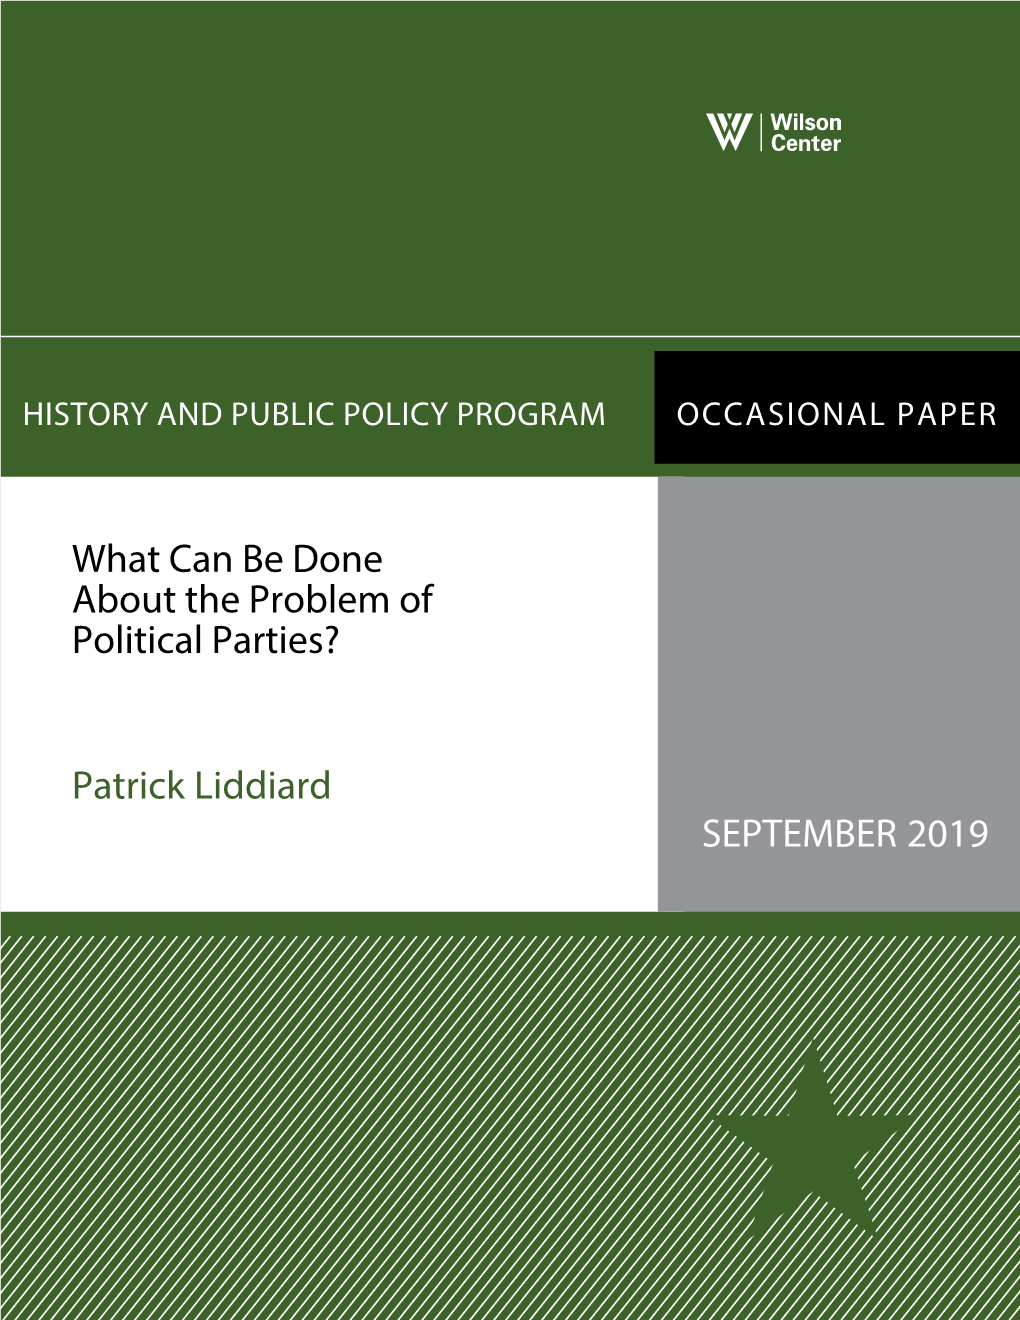 What Can Be Done About the Problem of Political Parties?